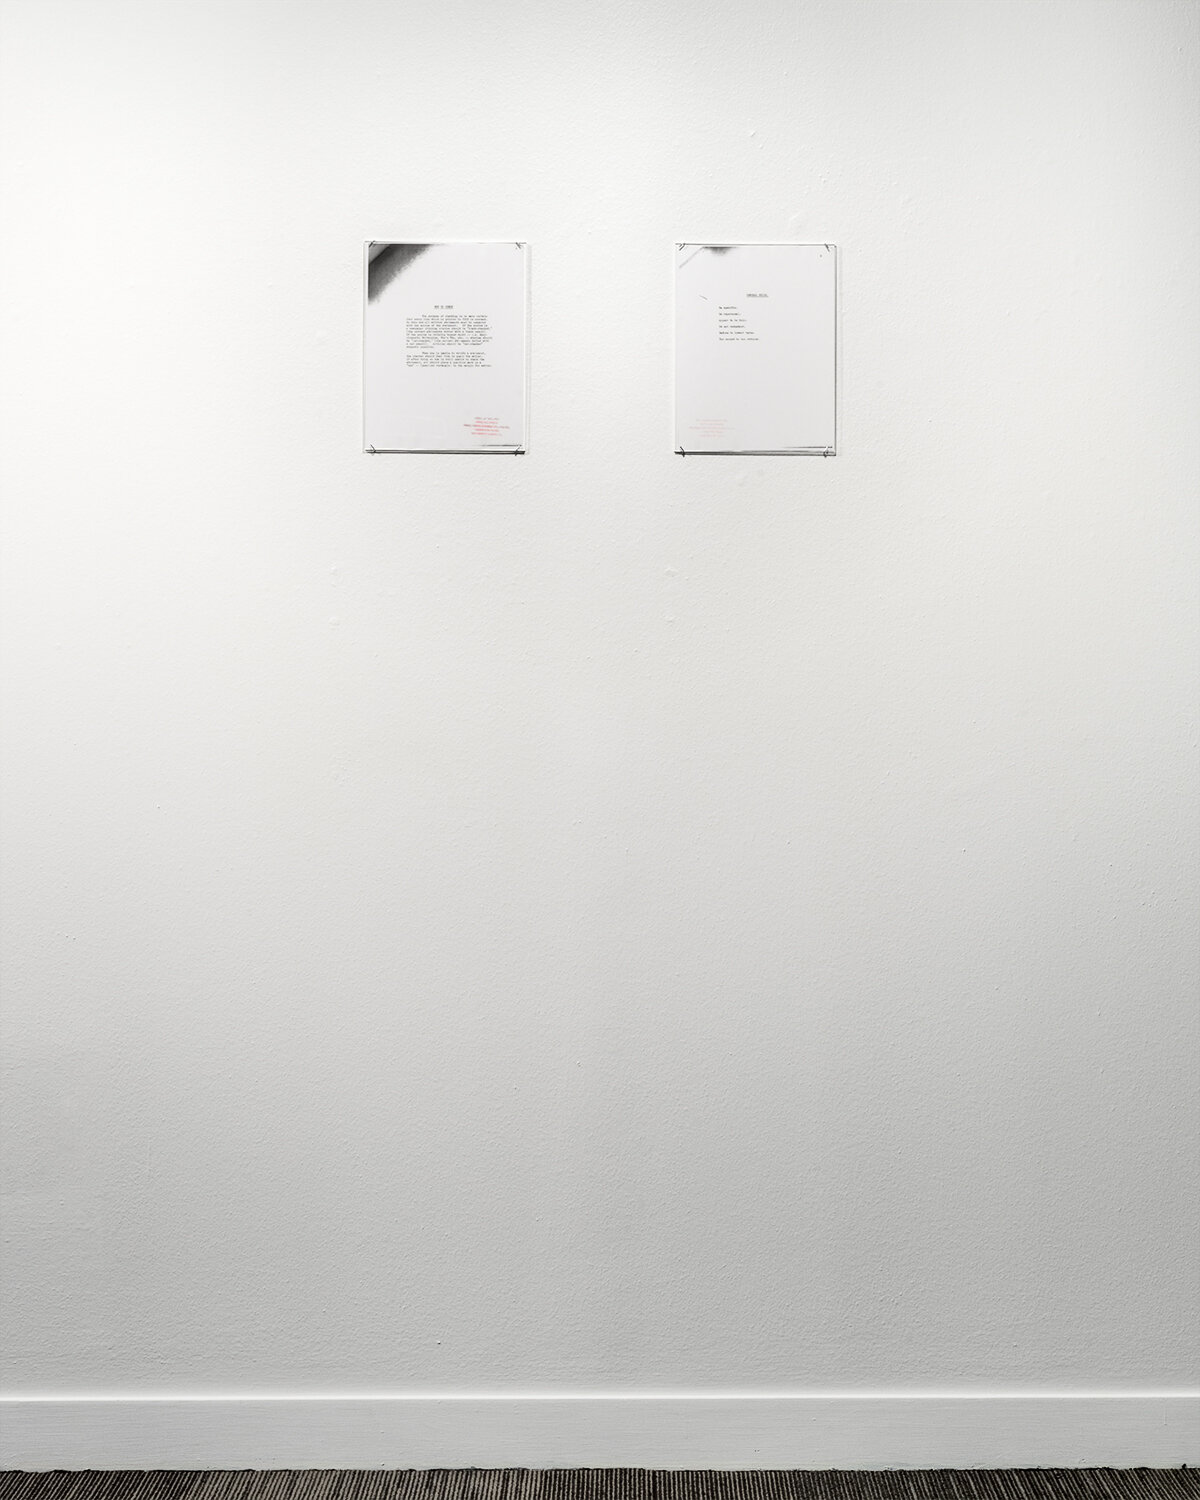   For research purposes only (How to Check)  and  (General Rules)  2019 11 x 8.5 inch each Stamped photocopies (Installation view) 